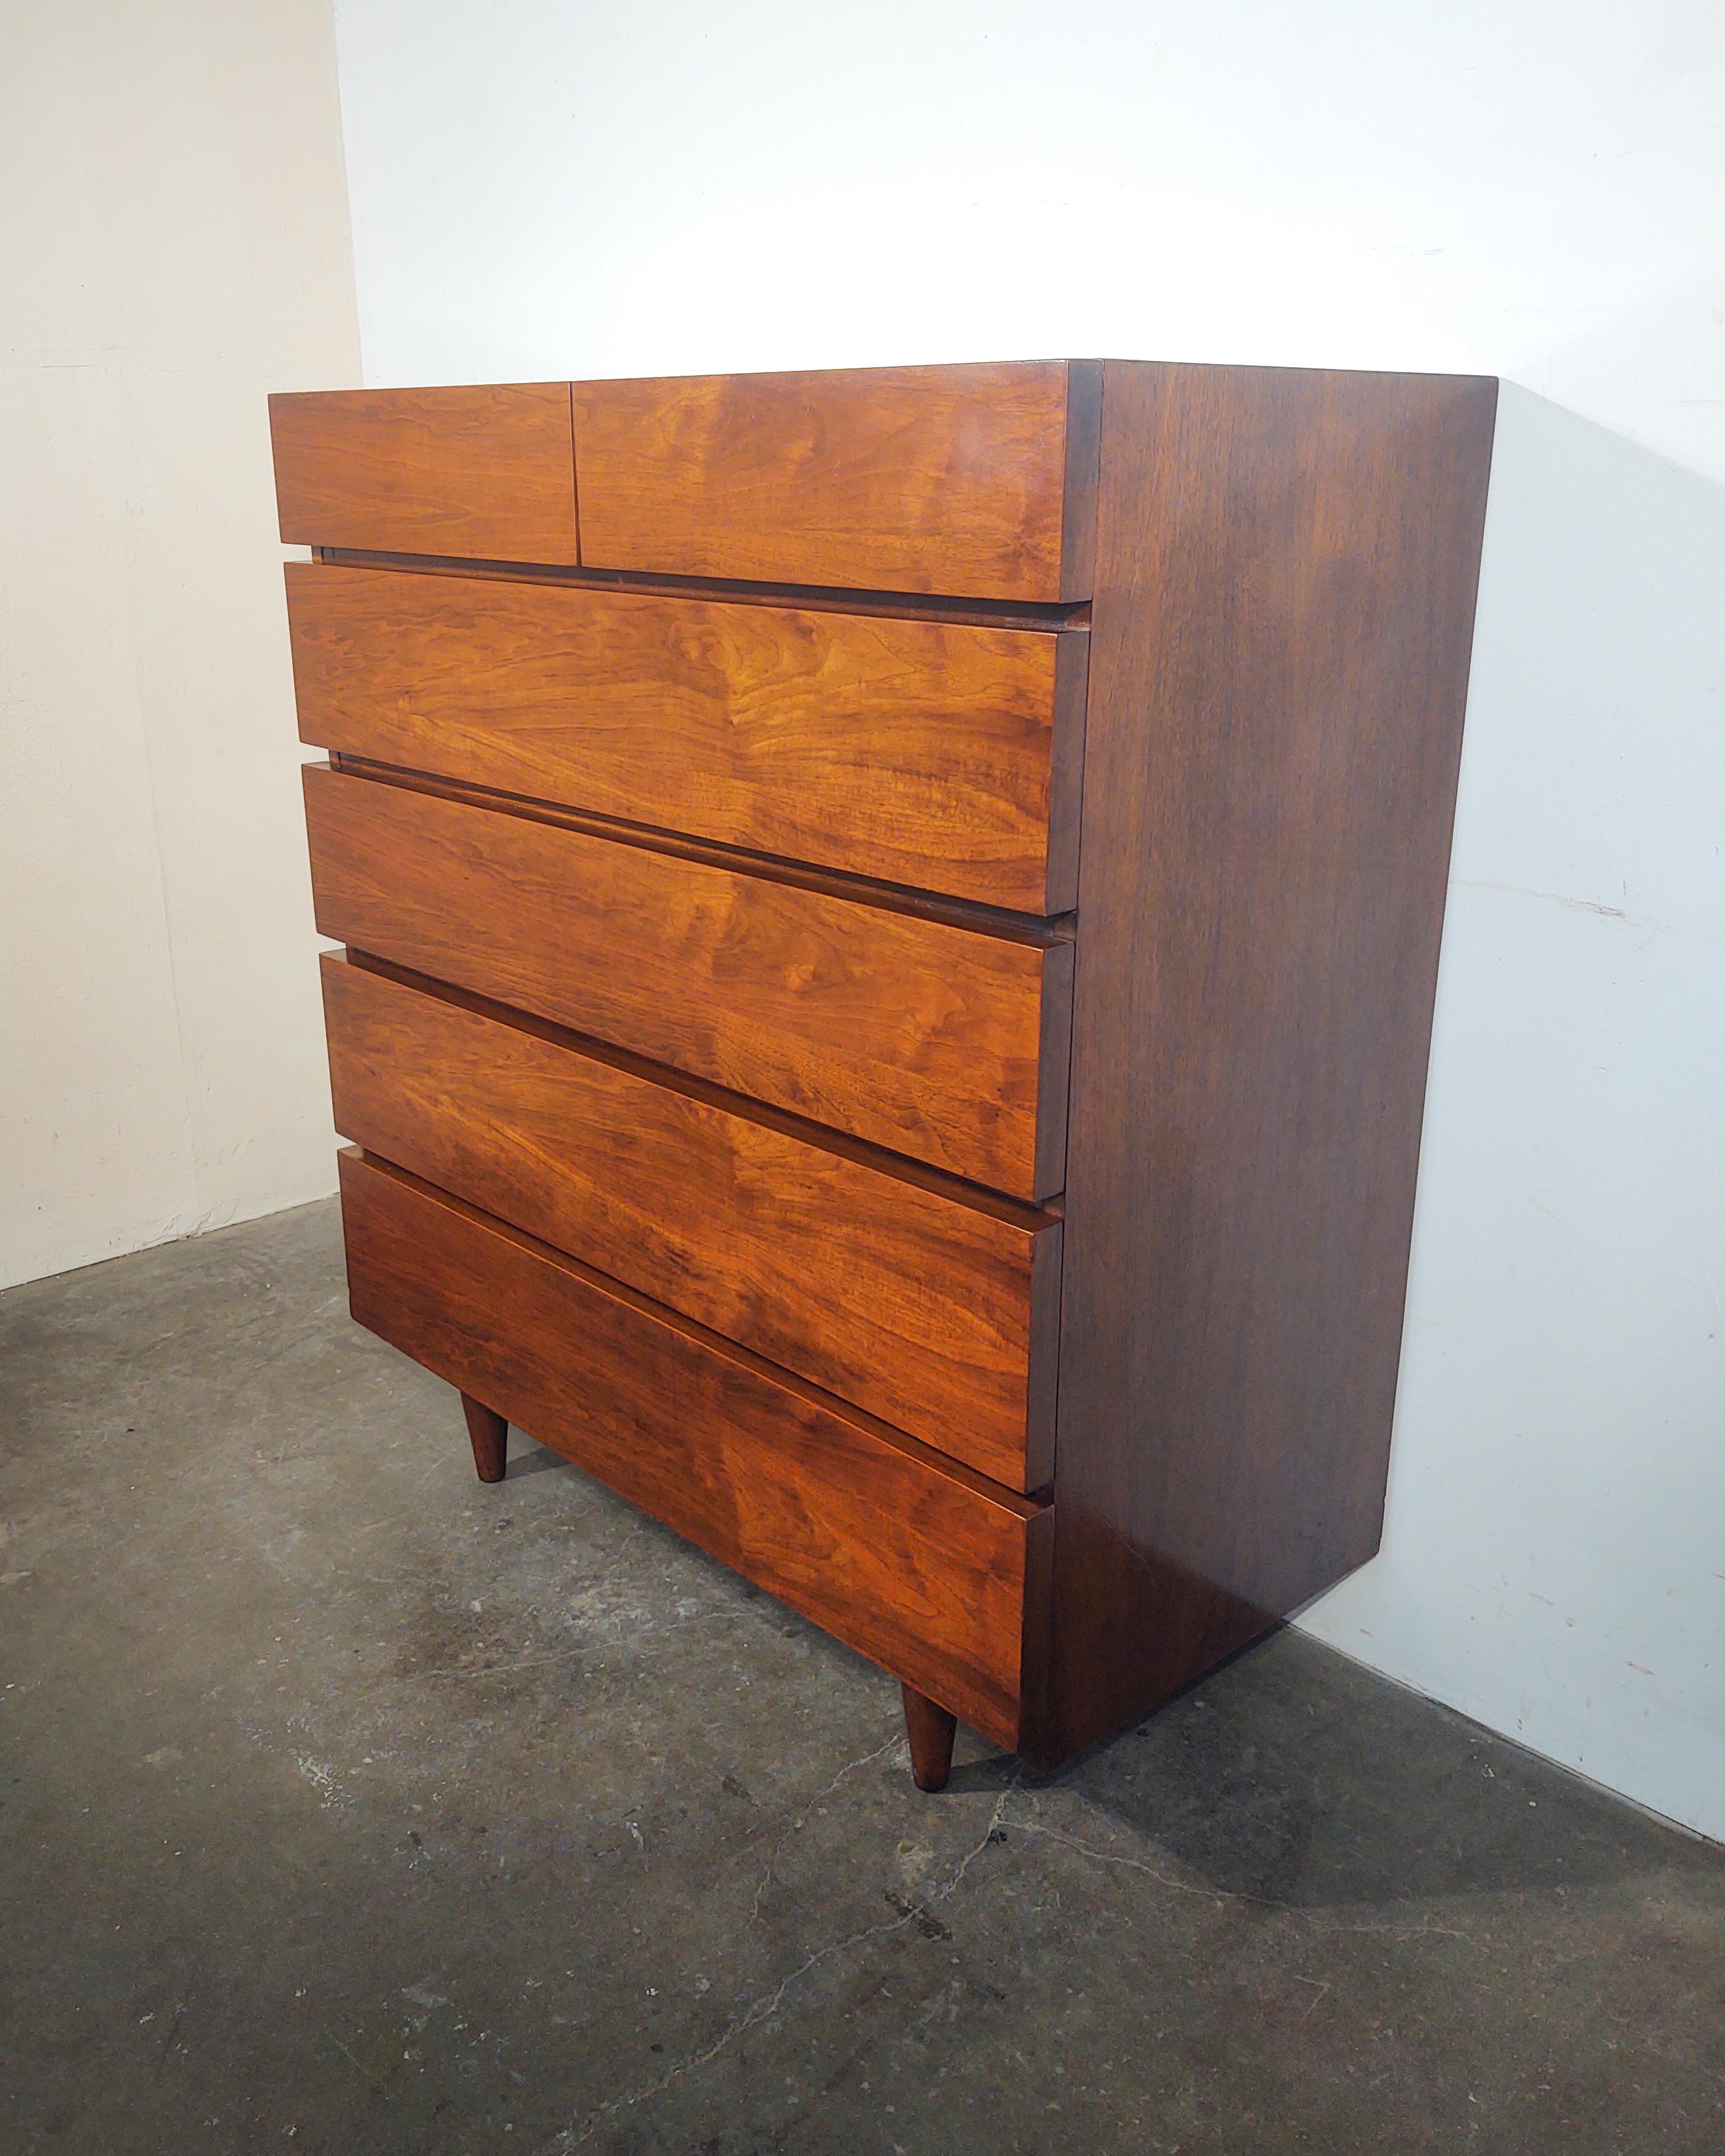 Minimal walnut highboy dresser by American of Martinsville circa 1960s. Gorgeous walnut wood grain covering entire body, excellent craftsmanship. The top two large drawers have dividers inside. Overall excellent original condition, some light wear